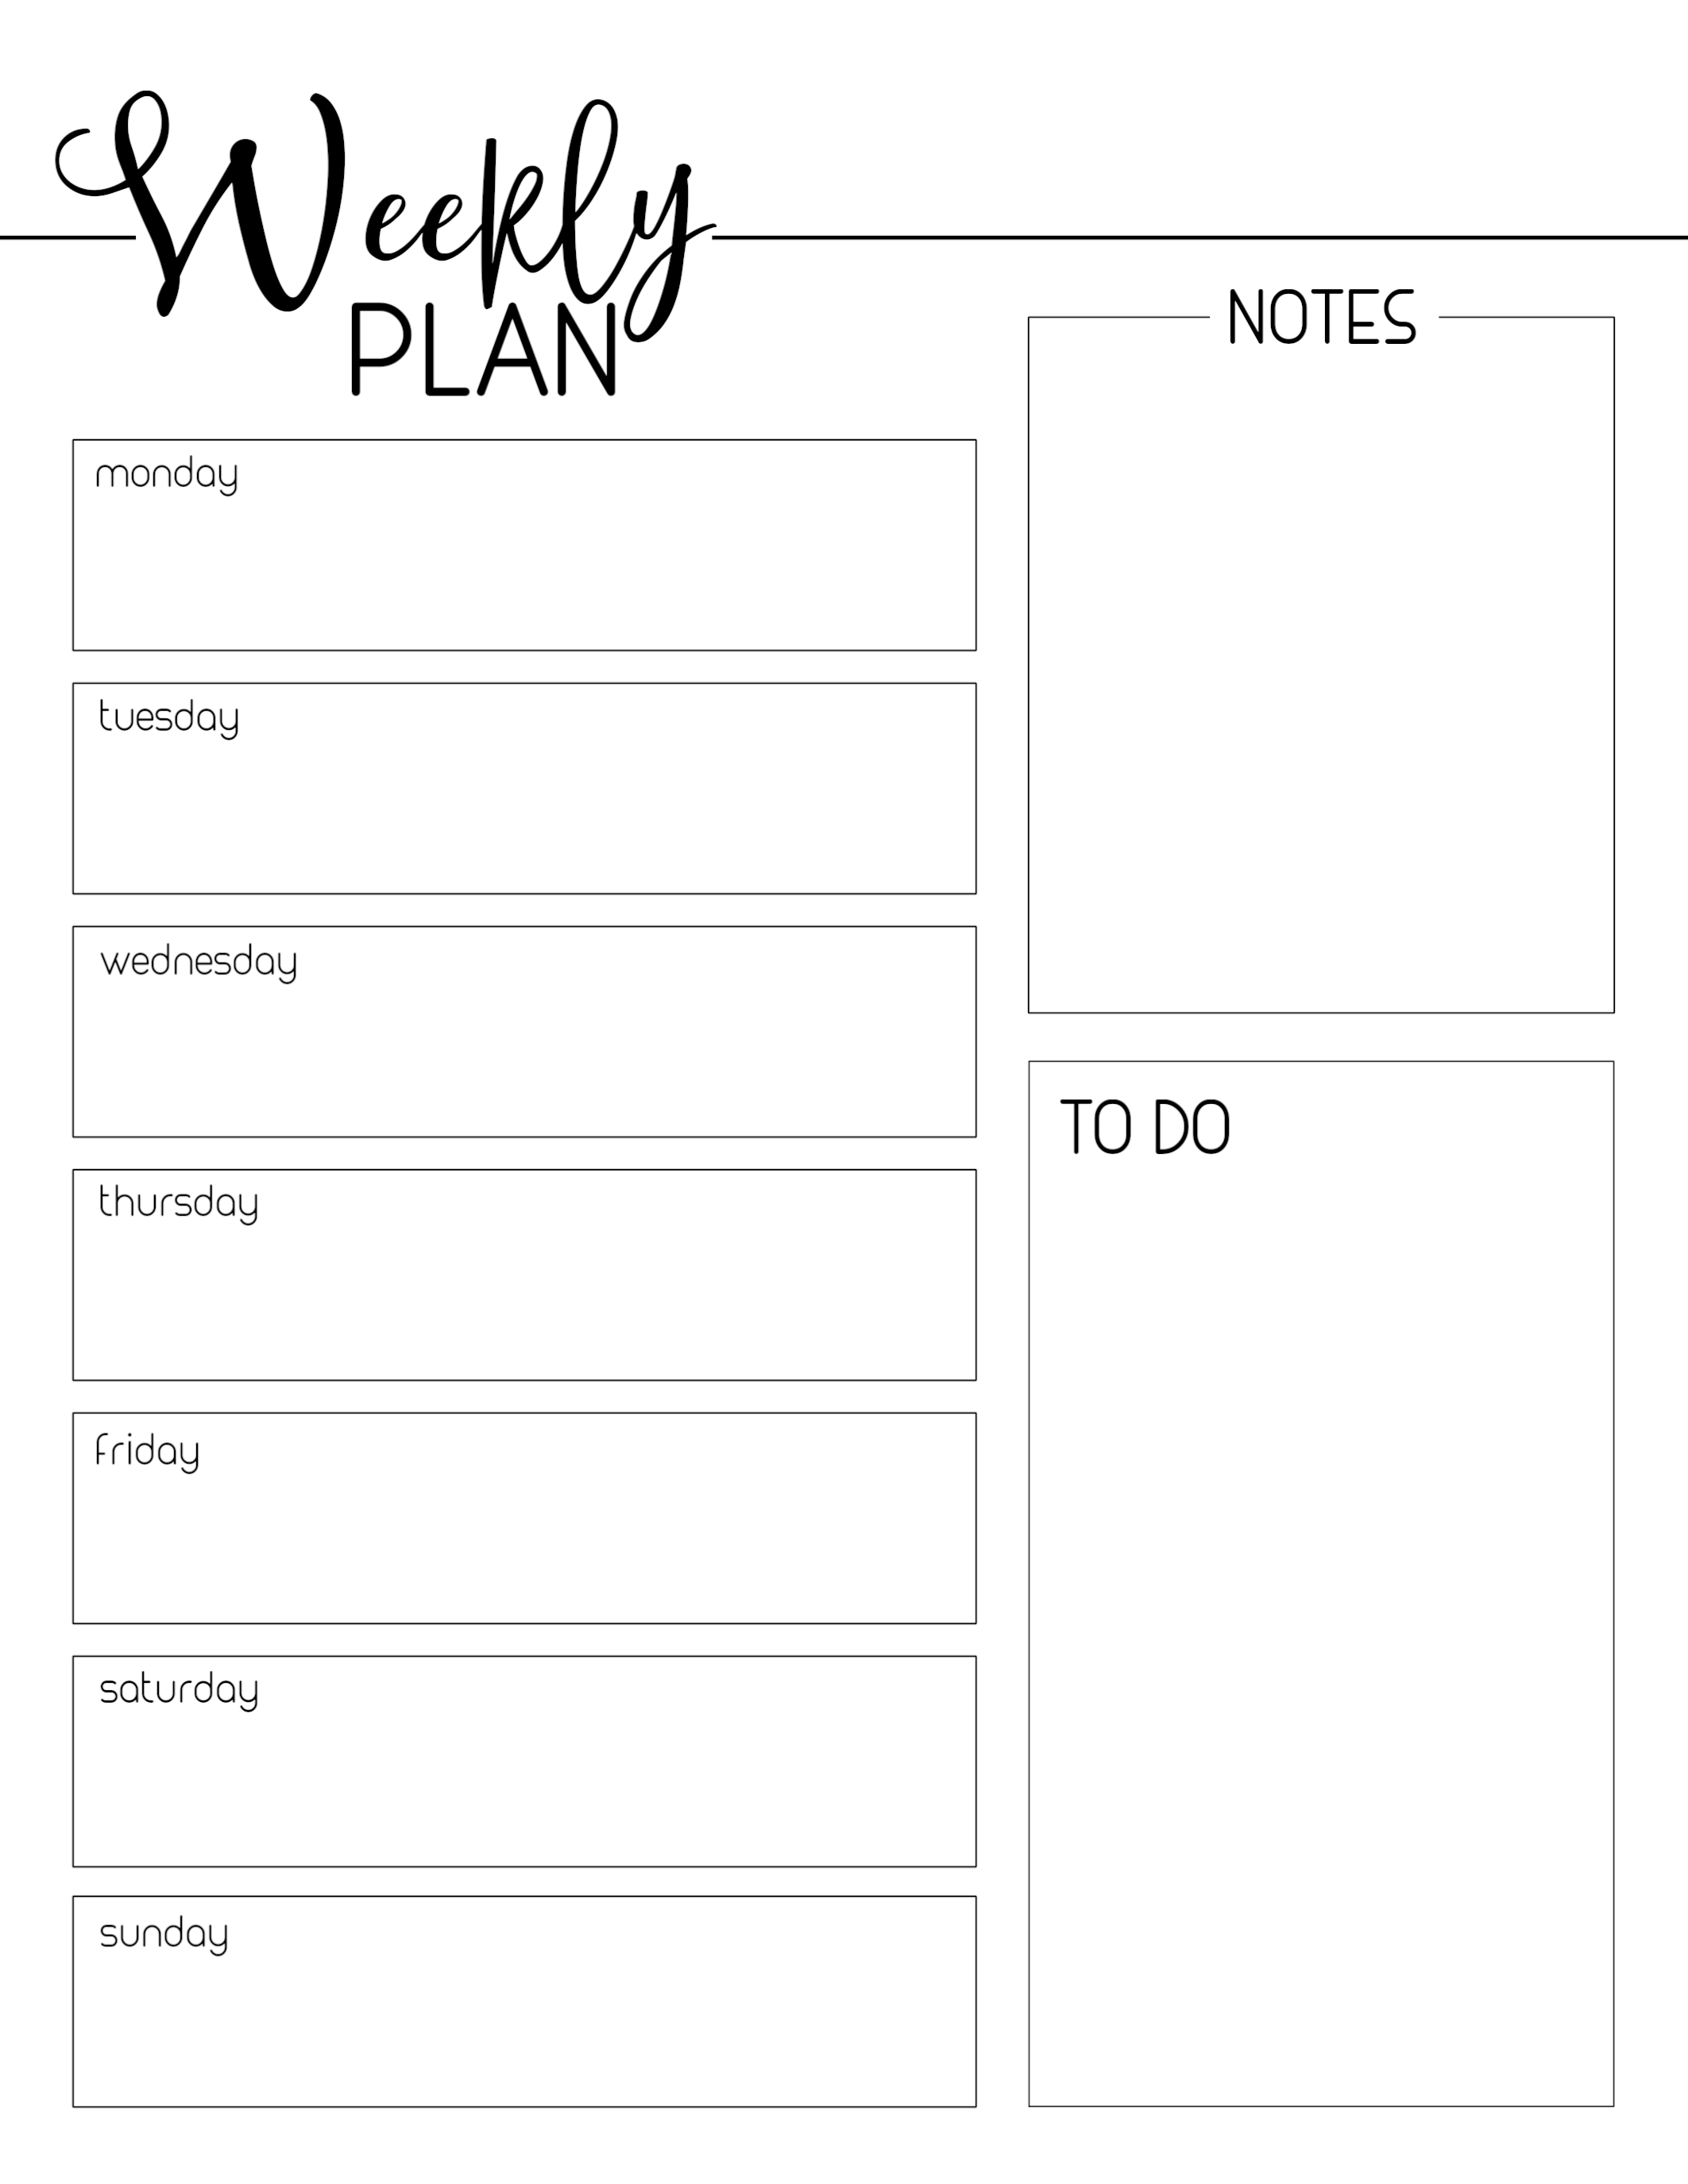 weekly-planner-template-free-printable-paper-trail-design